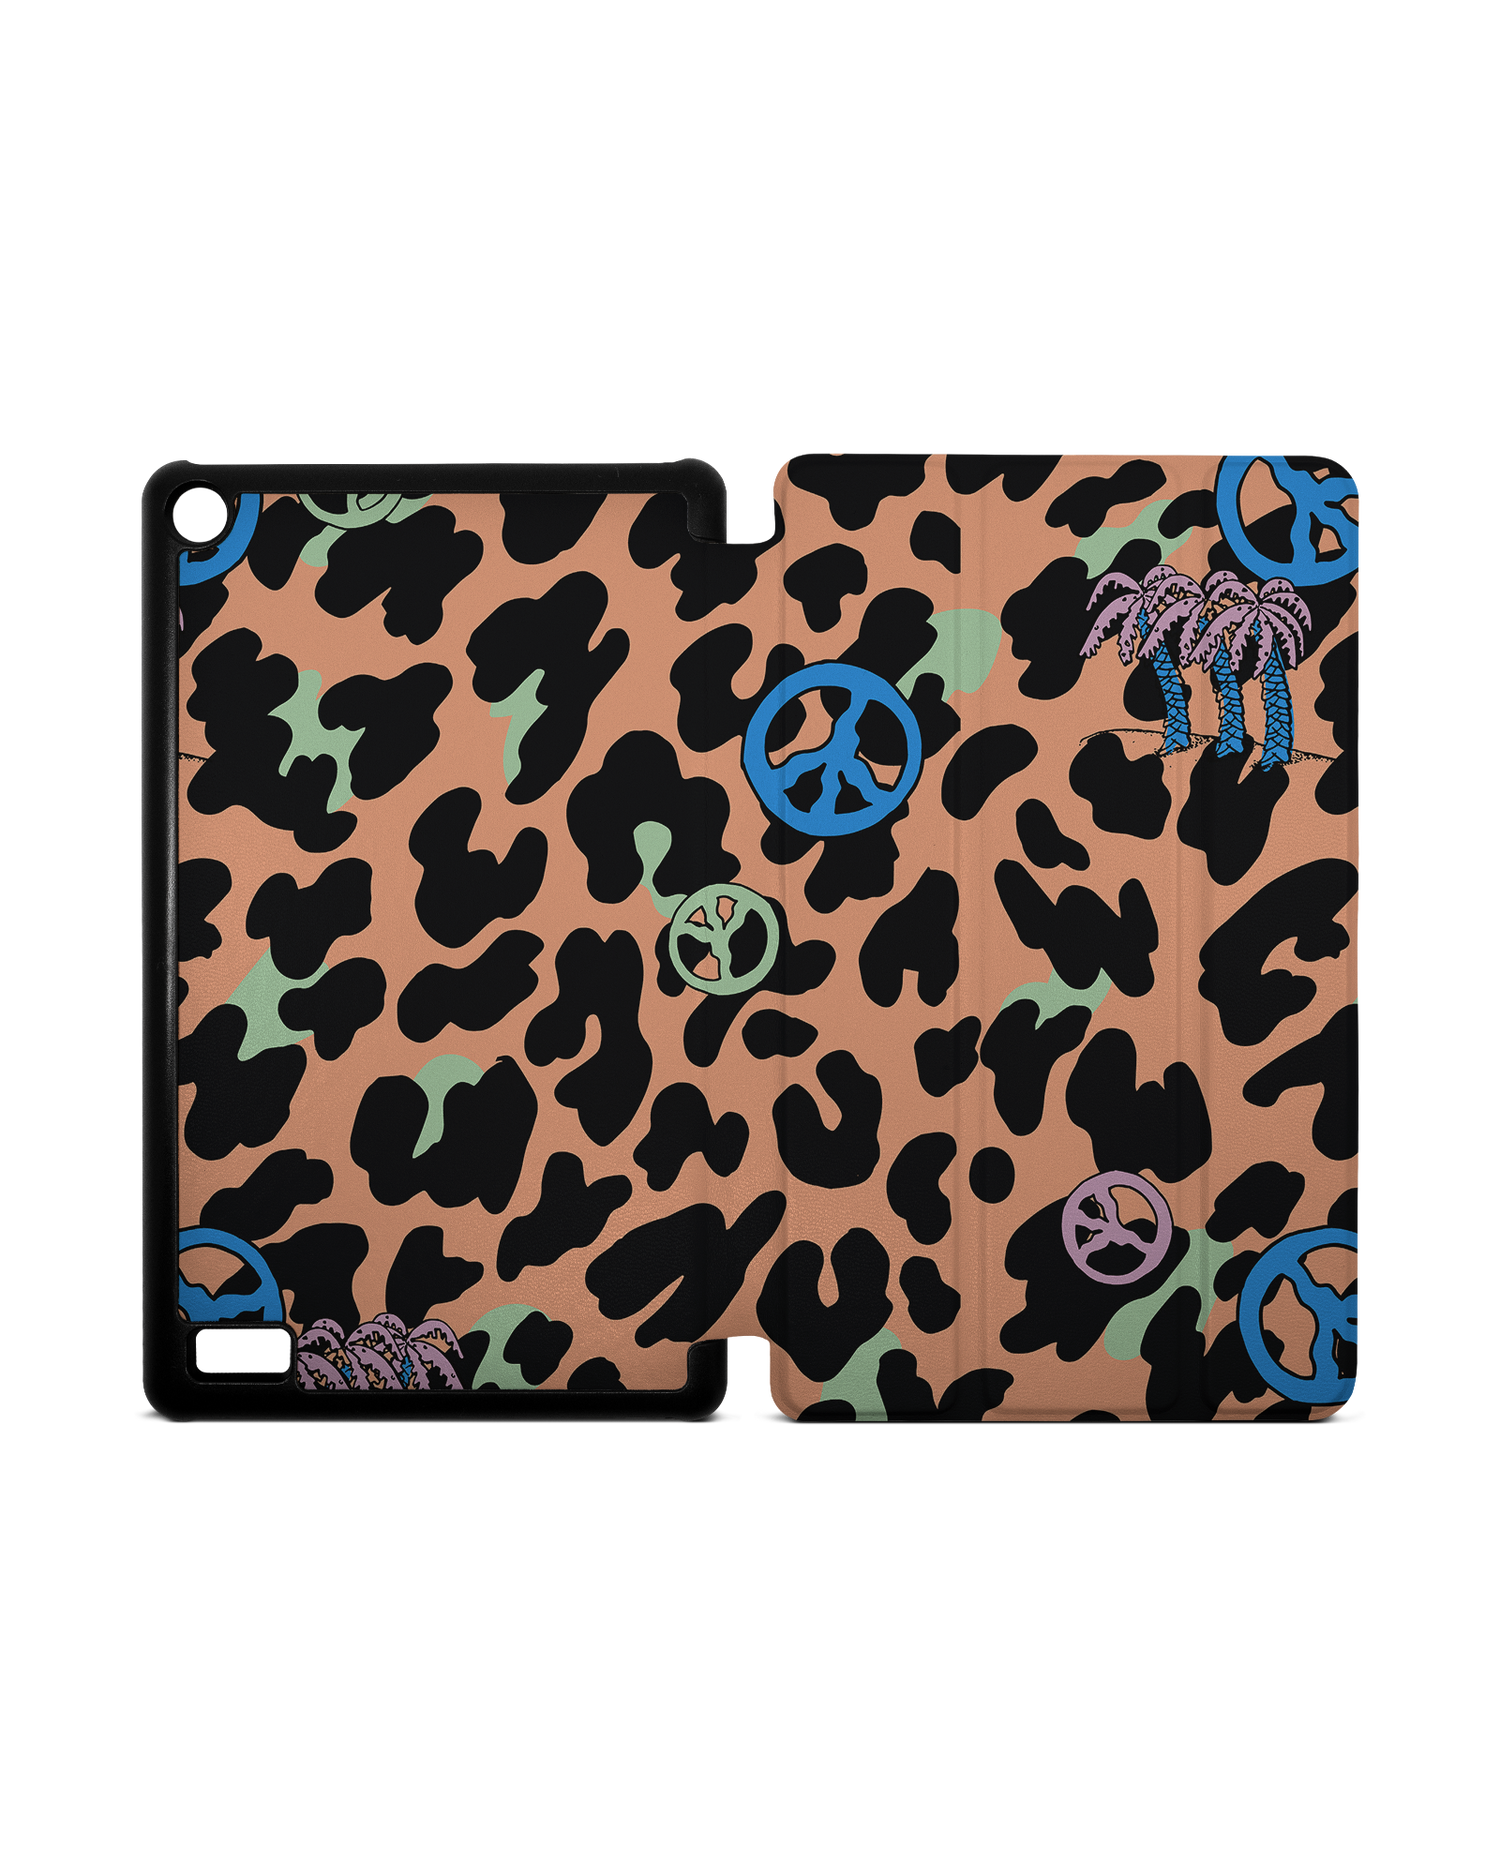 Leopard Peace Palms Tablet Smart Case for Amazon Fire 7: Opened